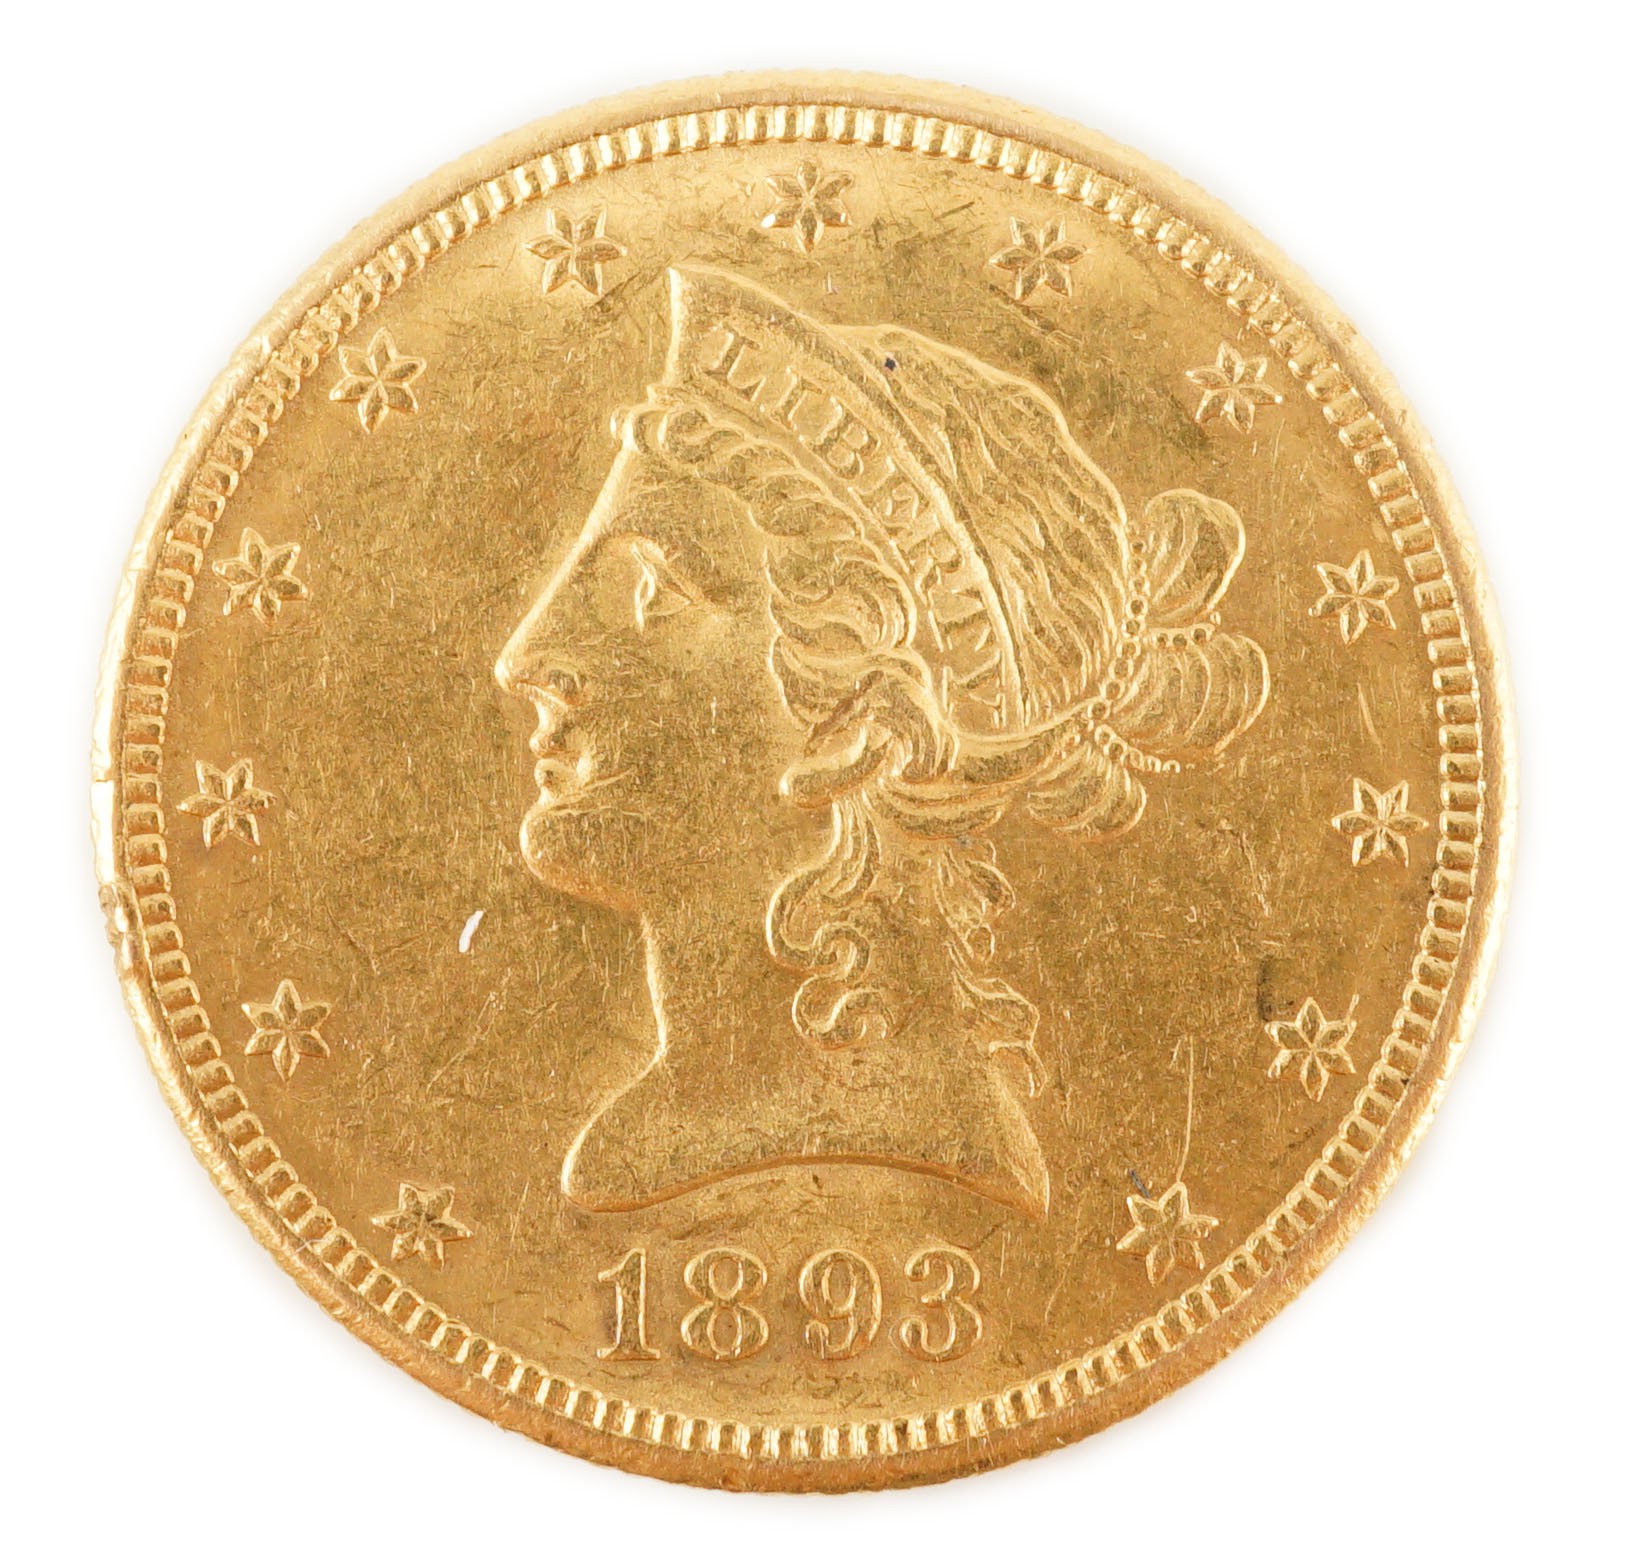 U.S.A coins, a Liberty Head gold $10, 1893, m.m. O, edge wear otherwise VF